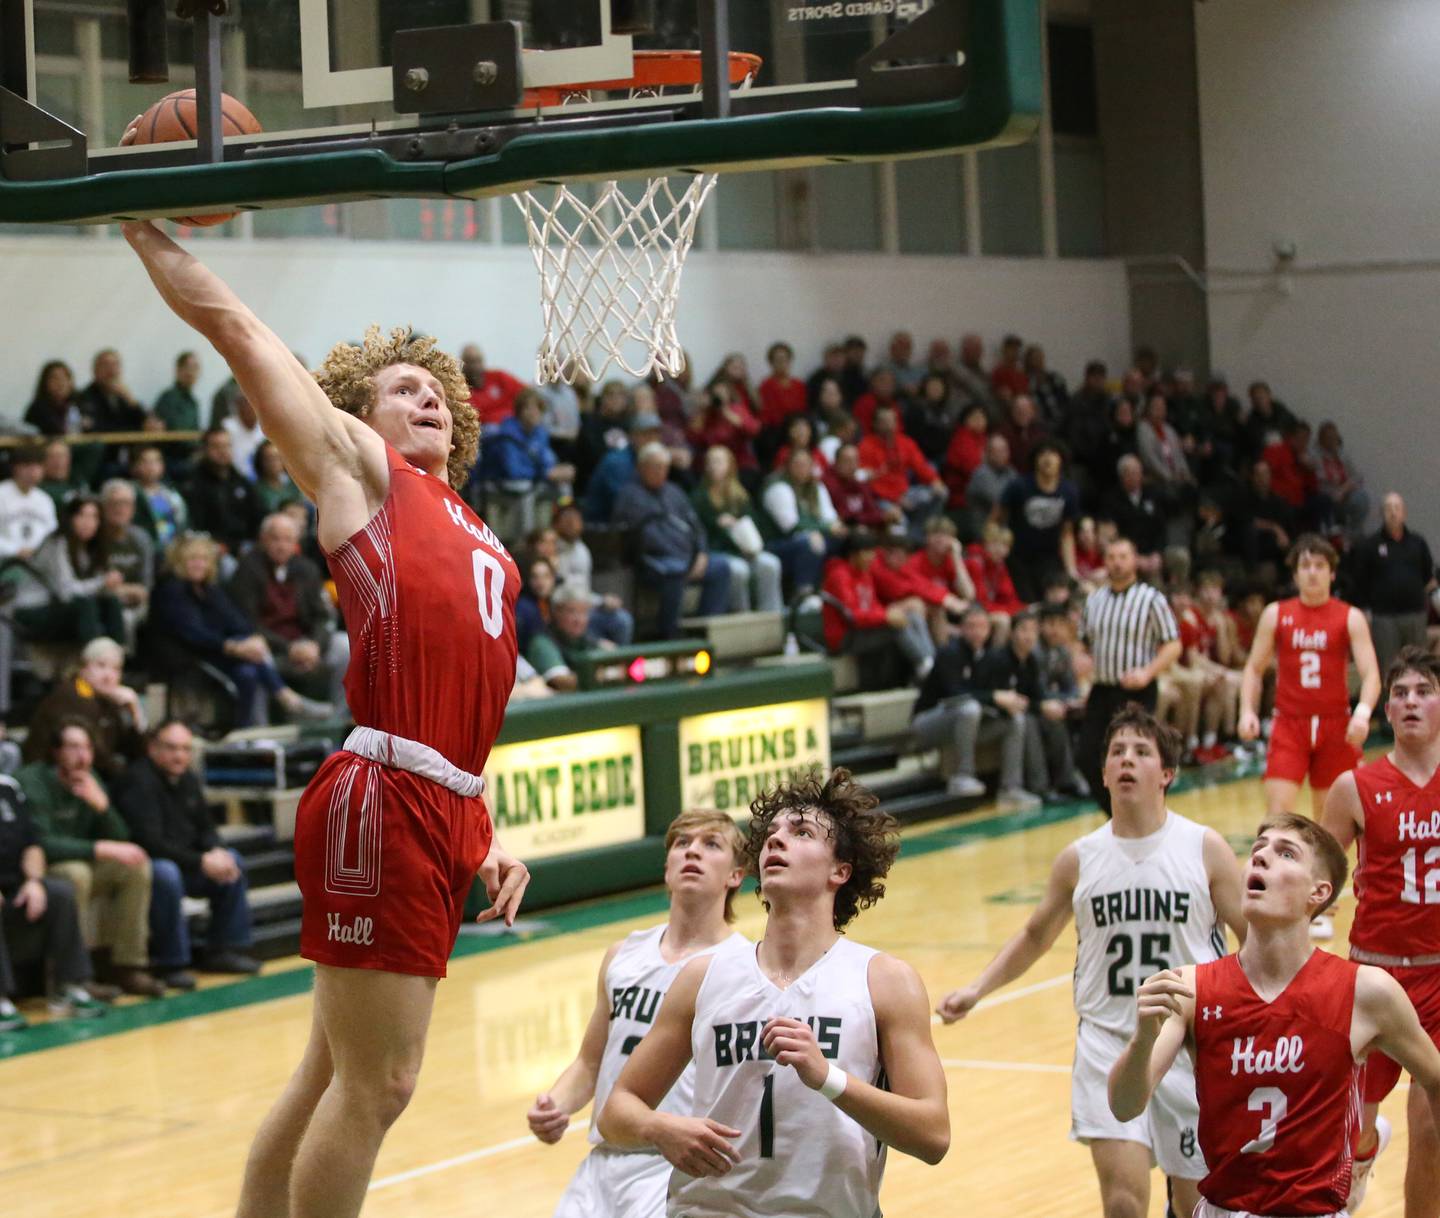 Hall's Mac Resetich (left) dunks the ball over St. Bede in the second quarter on Monday, Dec. 14, 2022 at St. Bede Academy.